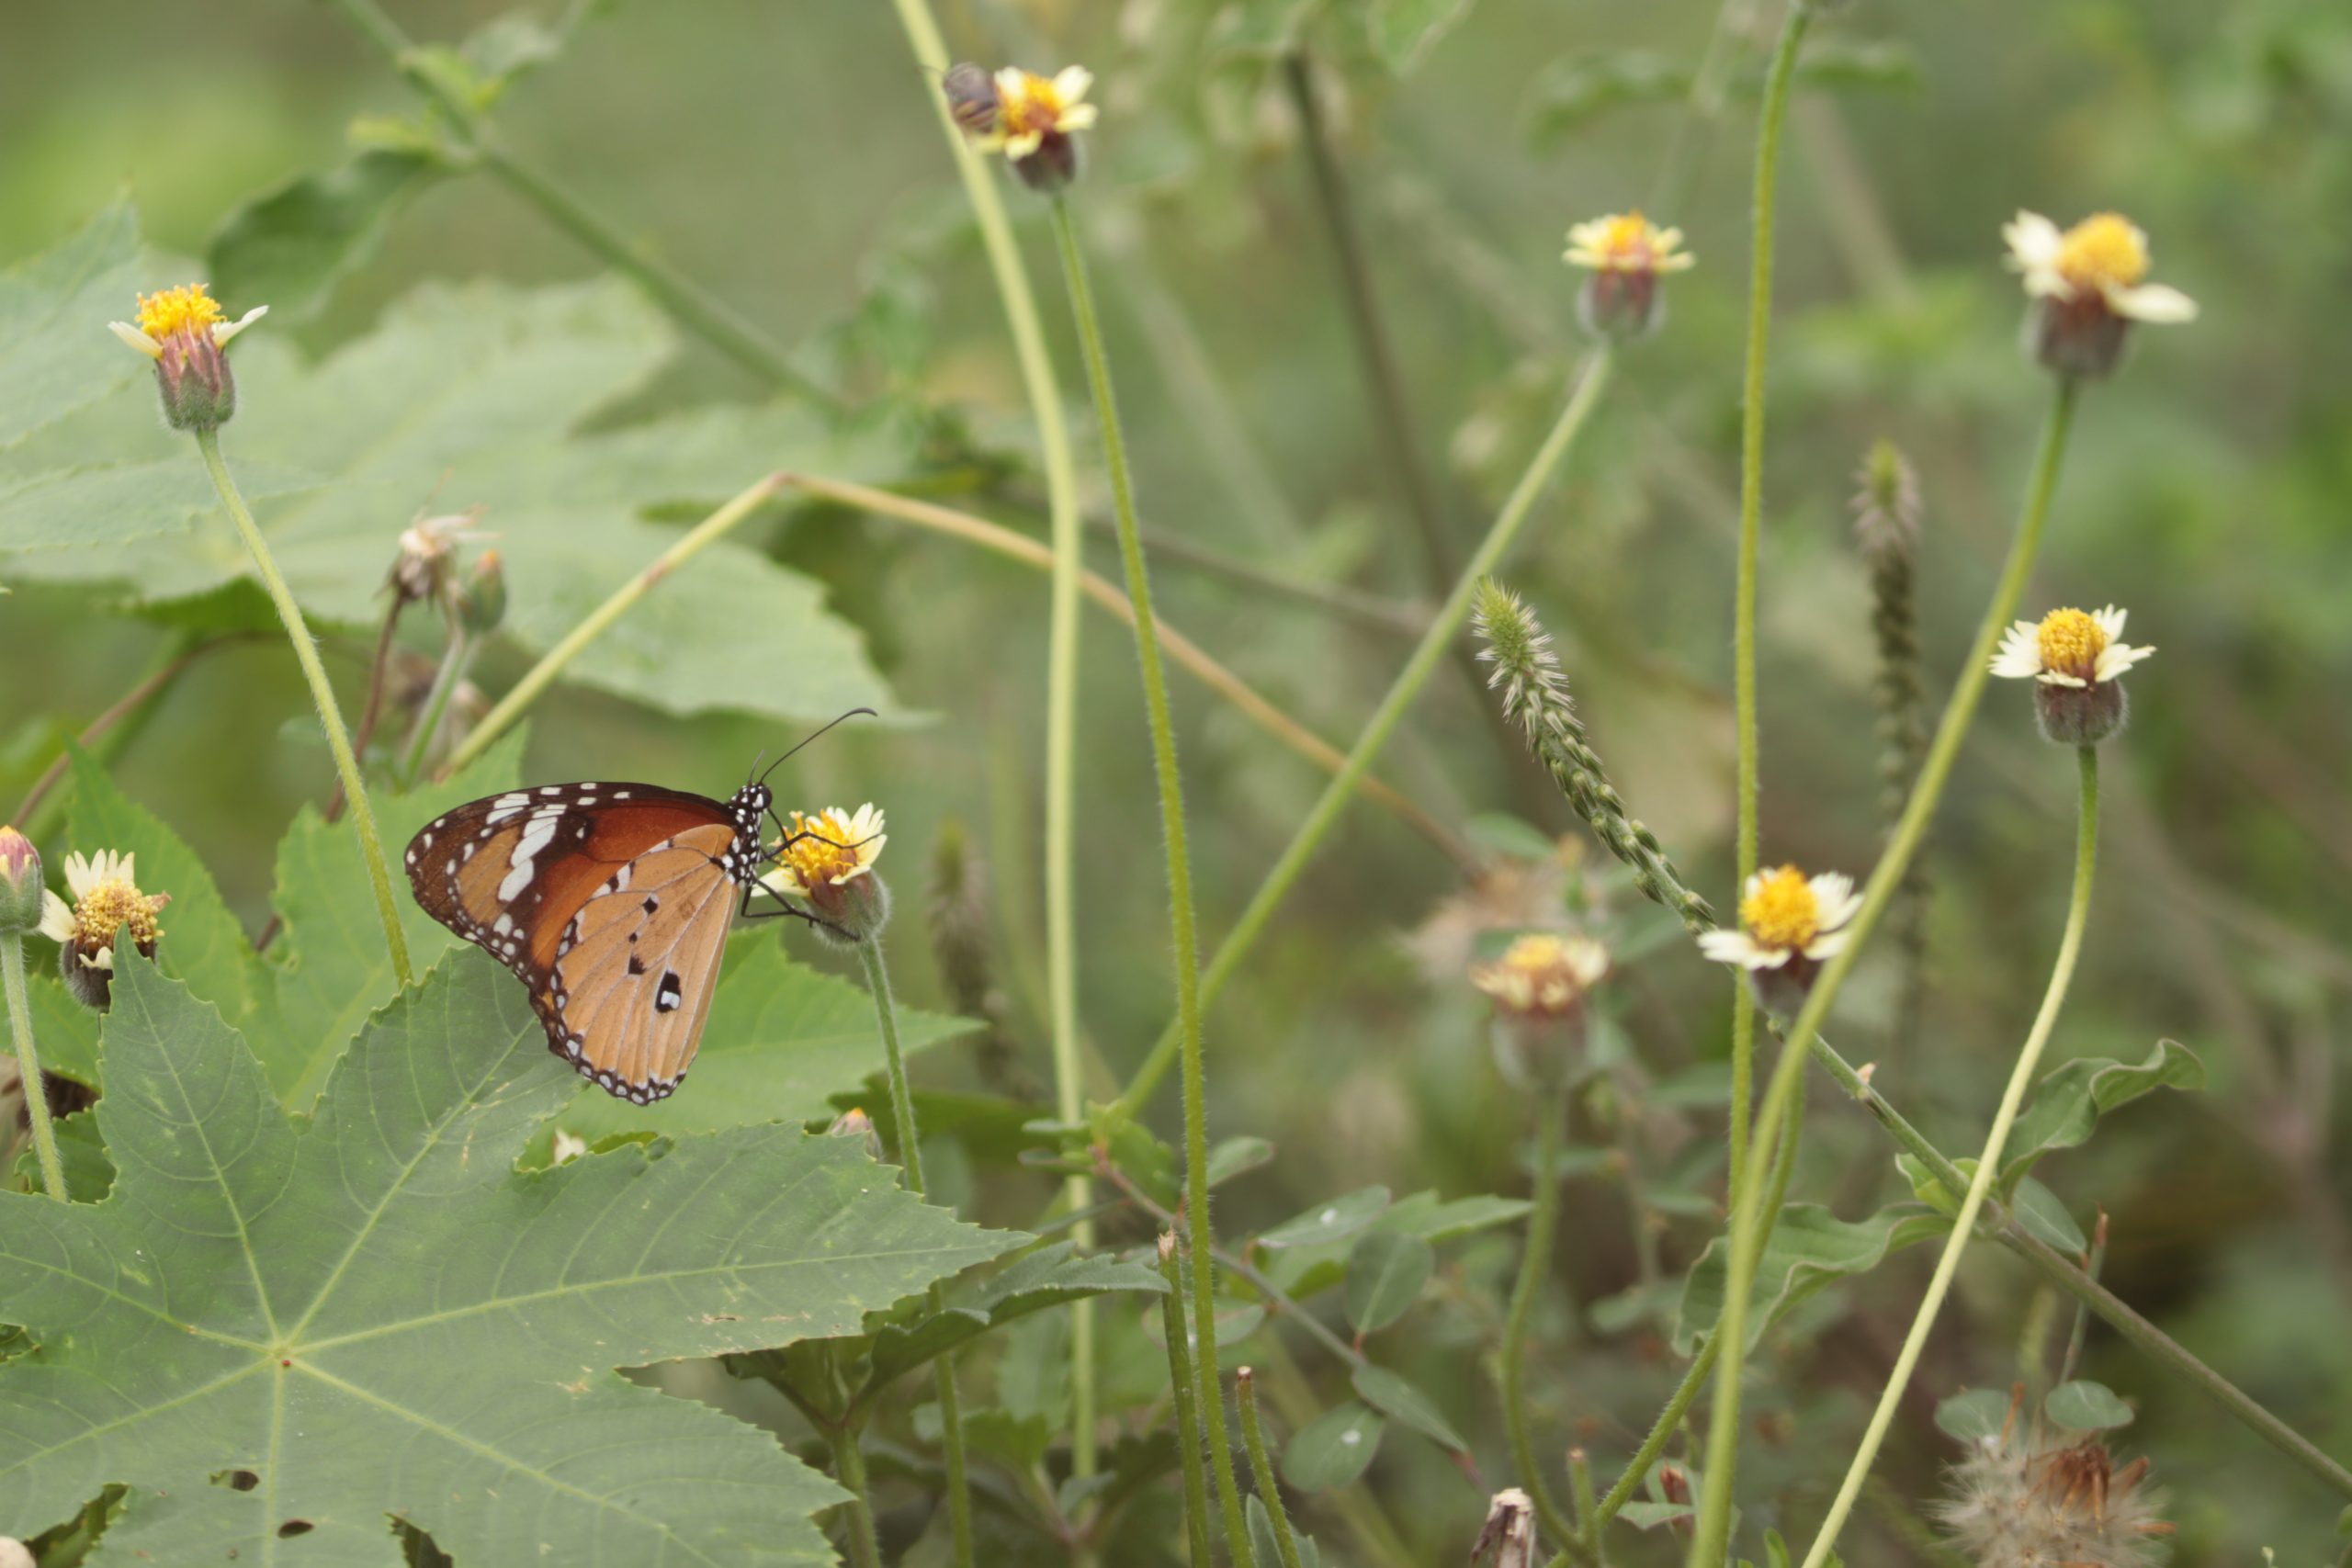 A butterfly on flower buds